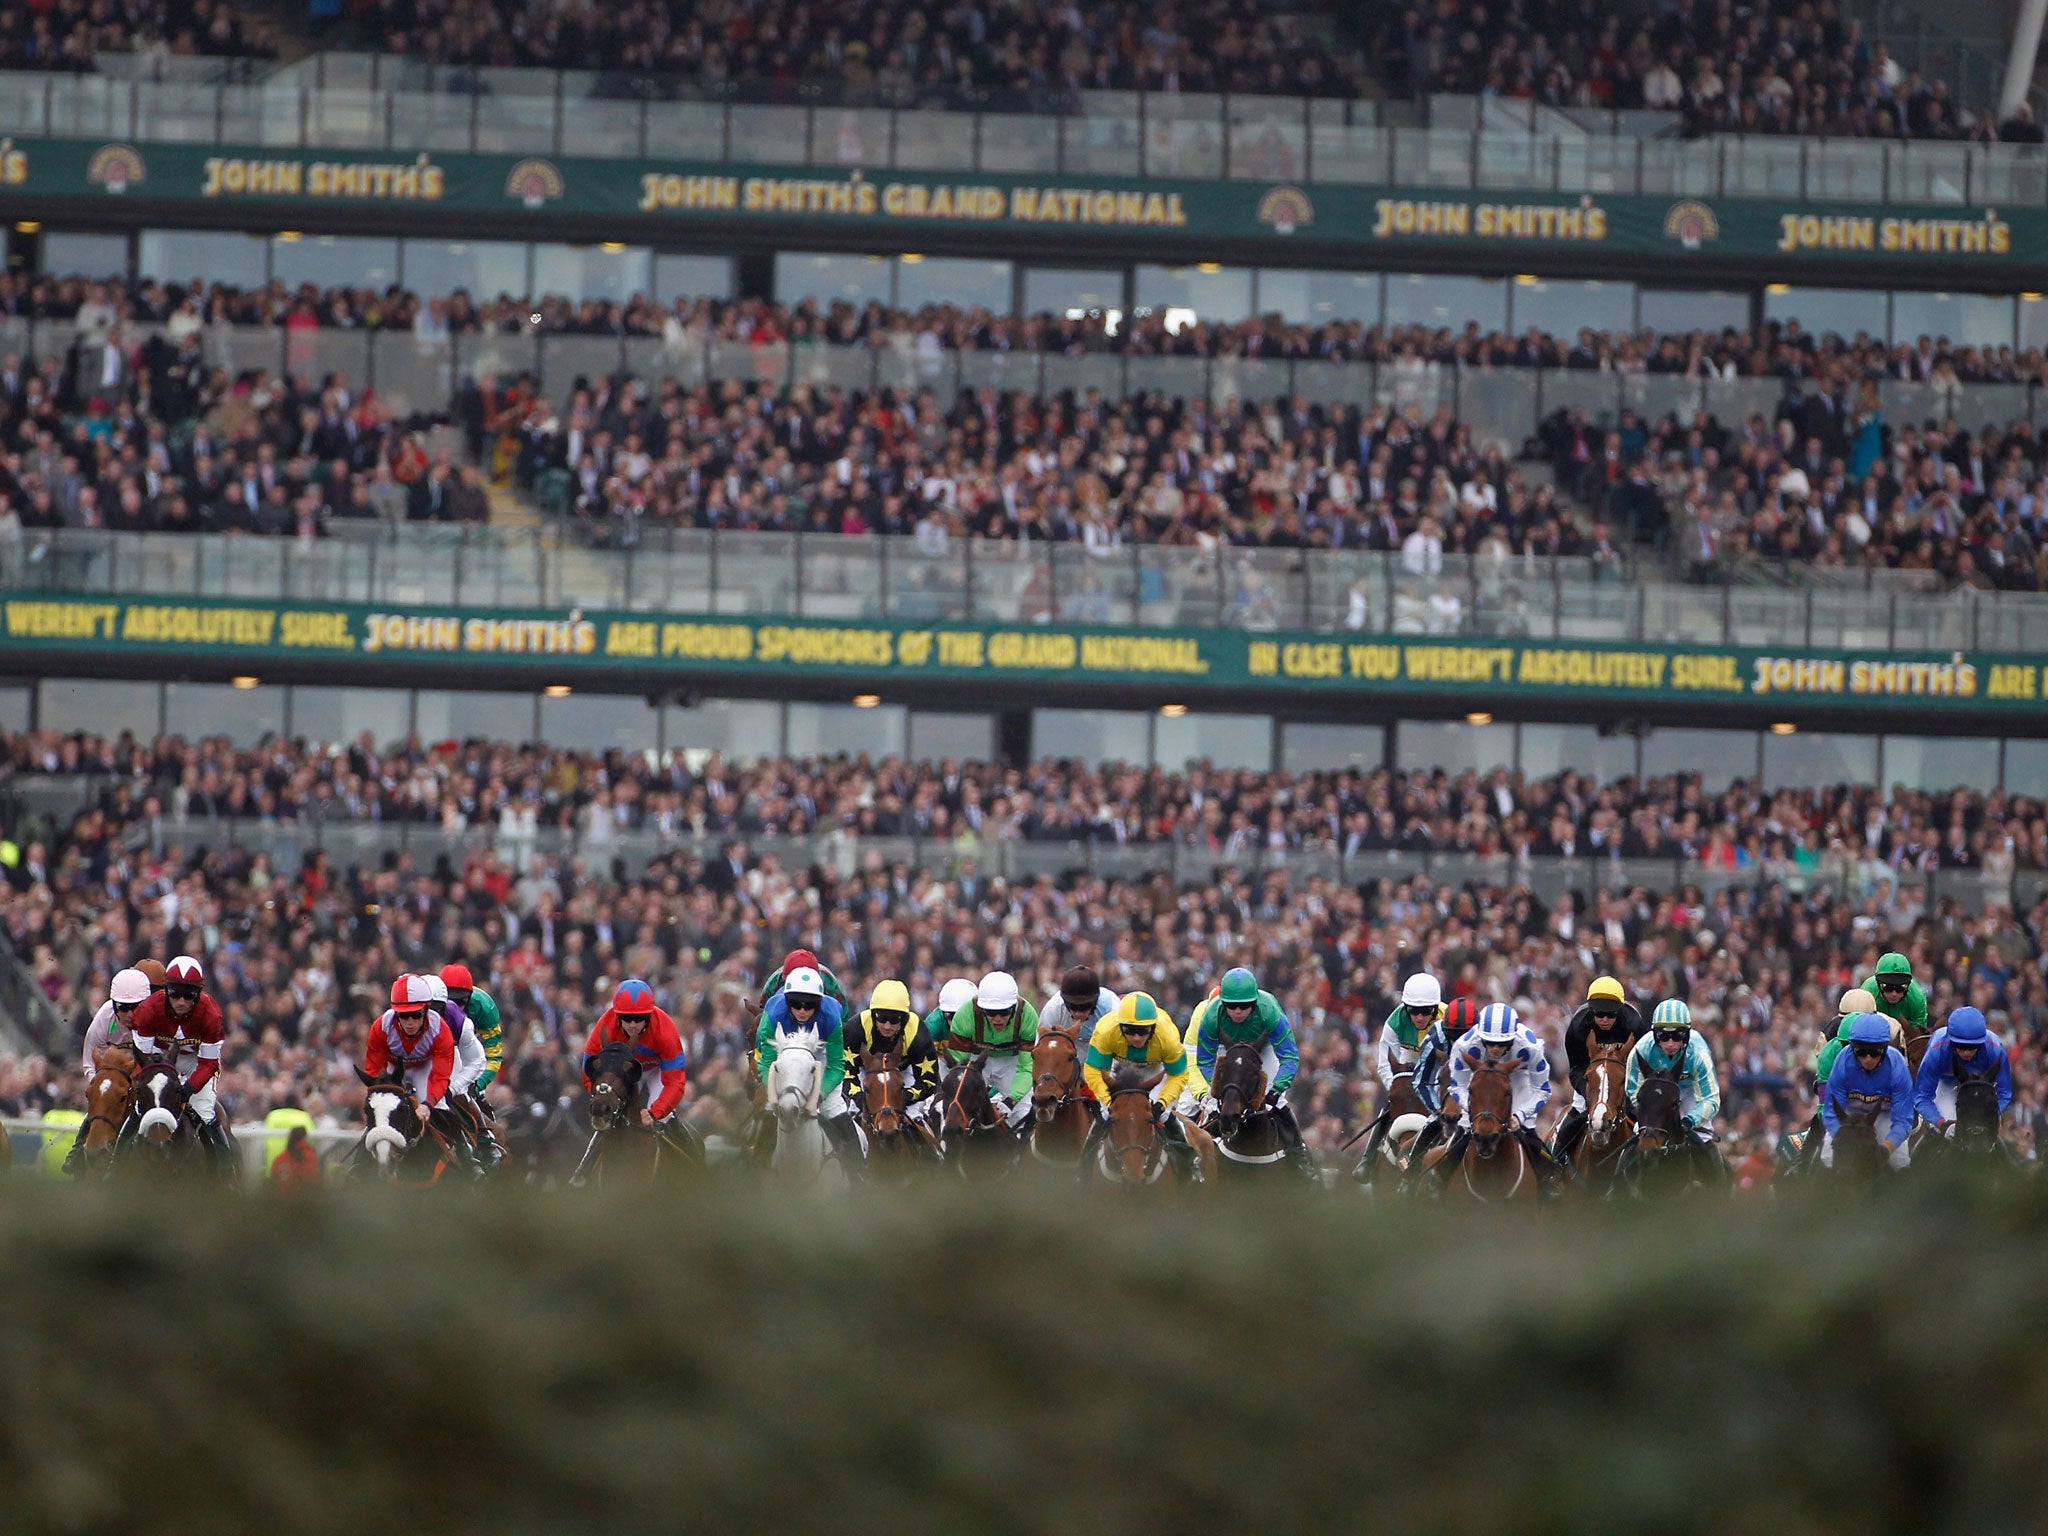 Runners heading towards the first fence during 2011 Grand National, when one horse, Ornais, broke its neck and Dooneys Gate broke its back